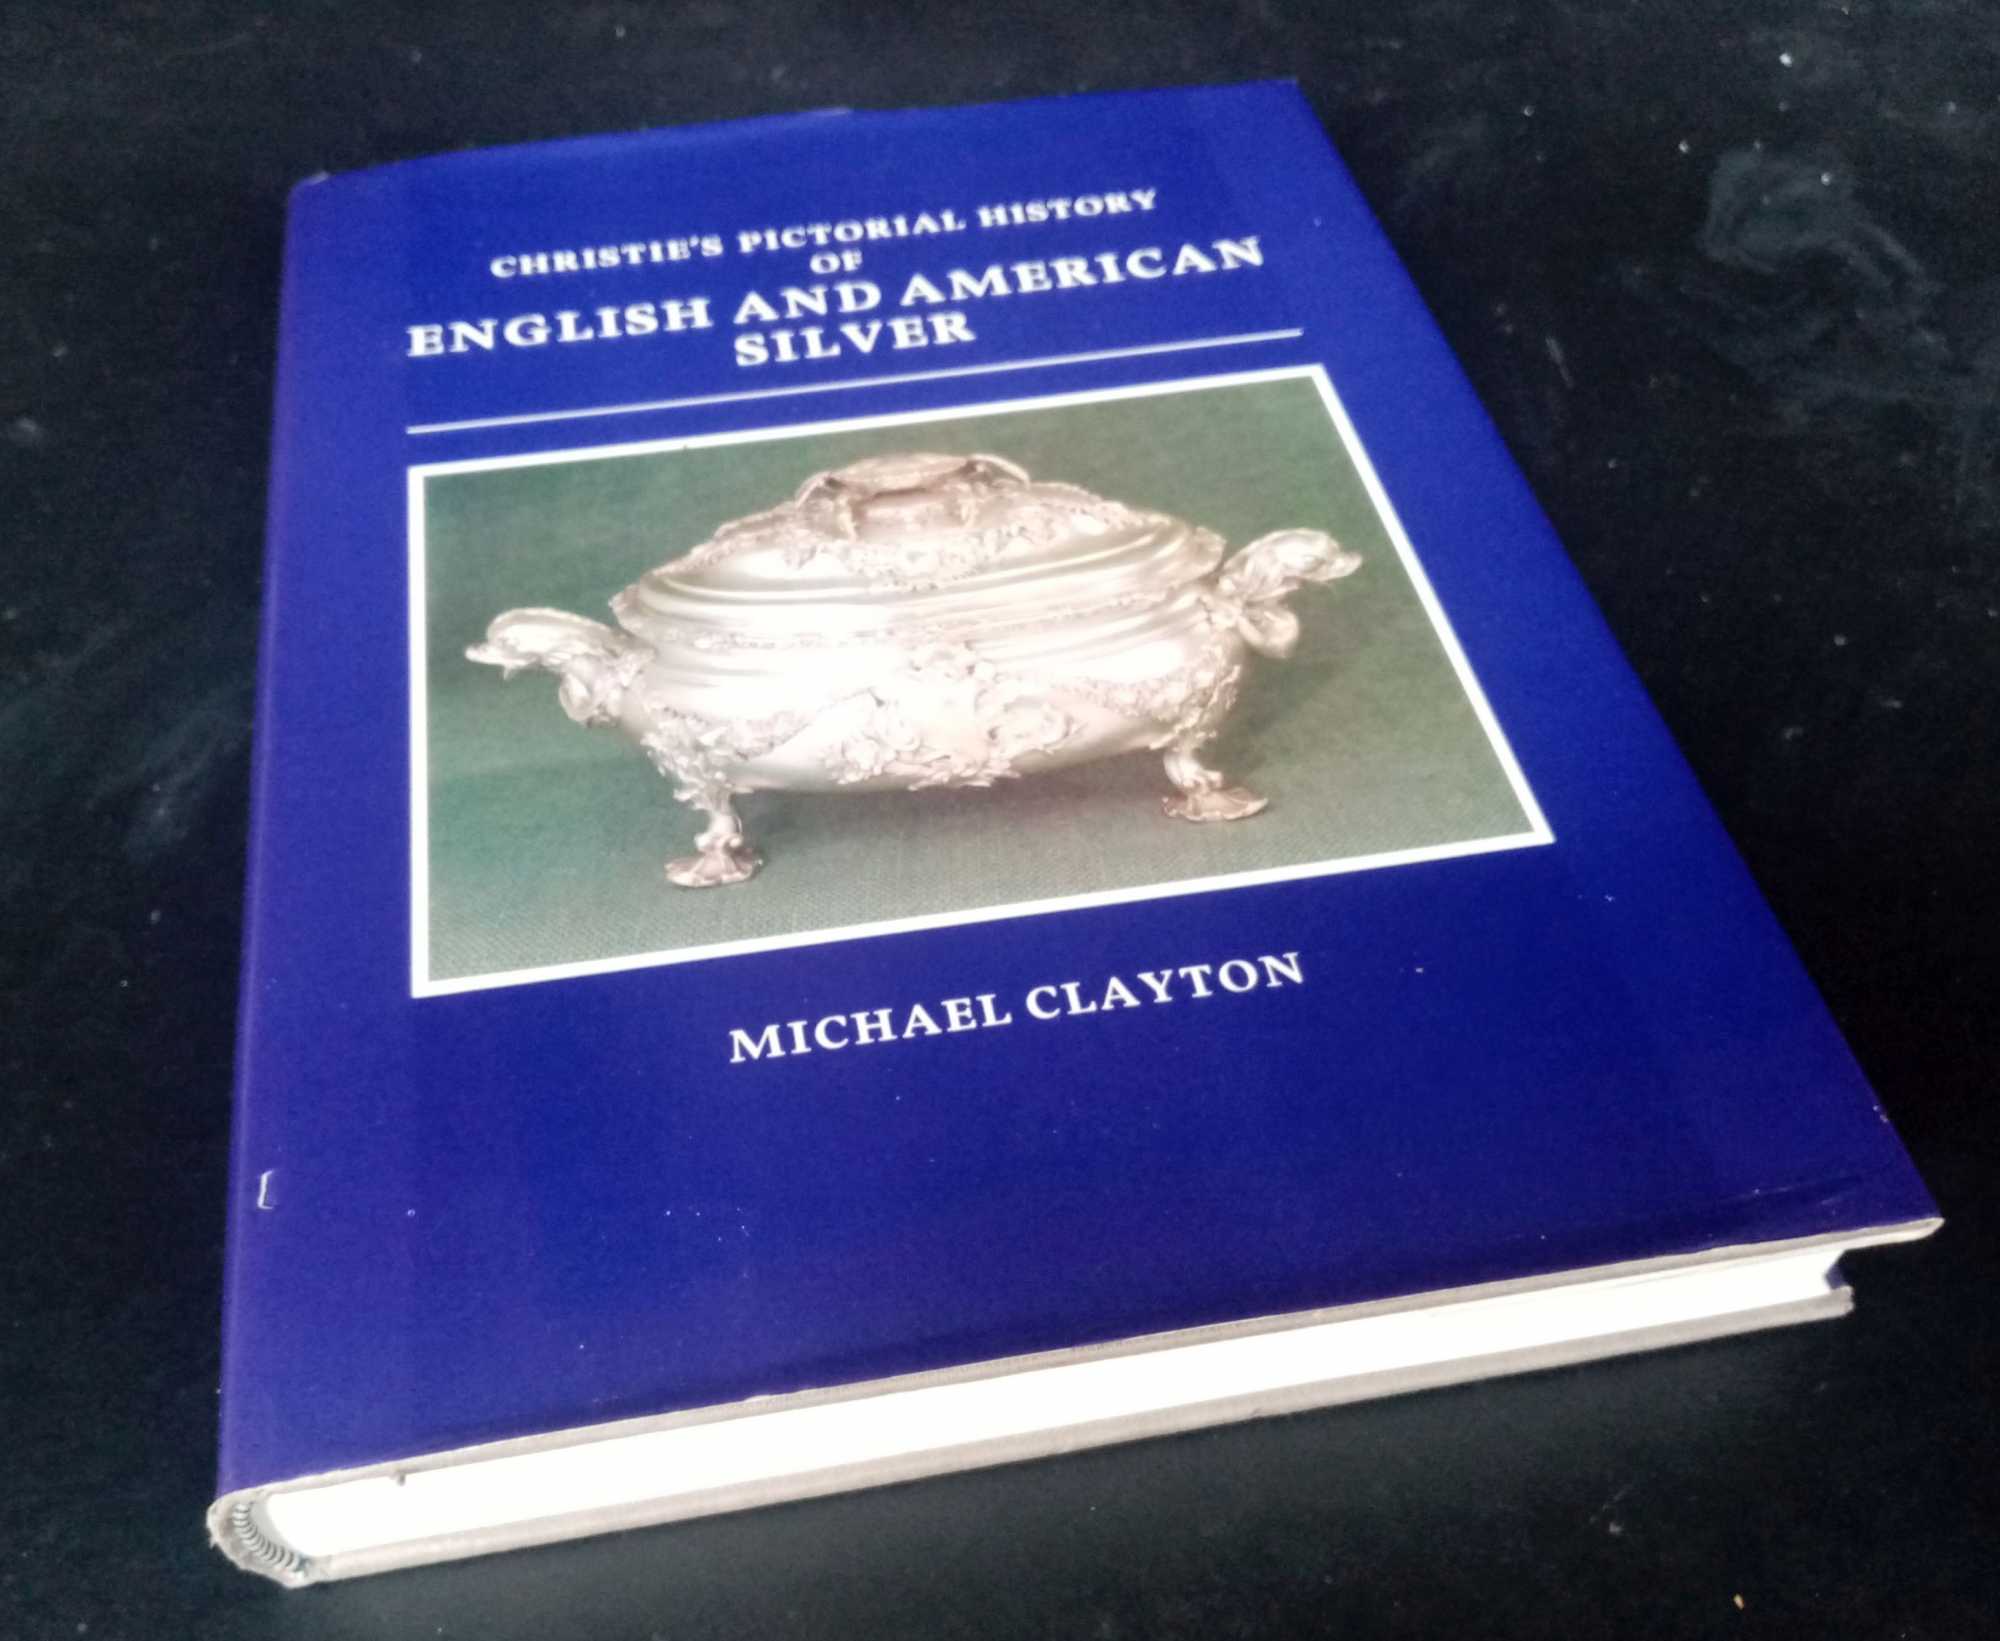 Michael Clayton - Christie's Pictorial History of English and American Silver